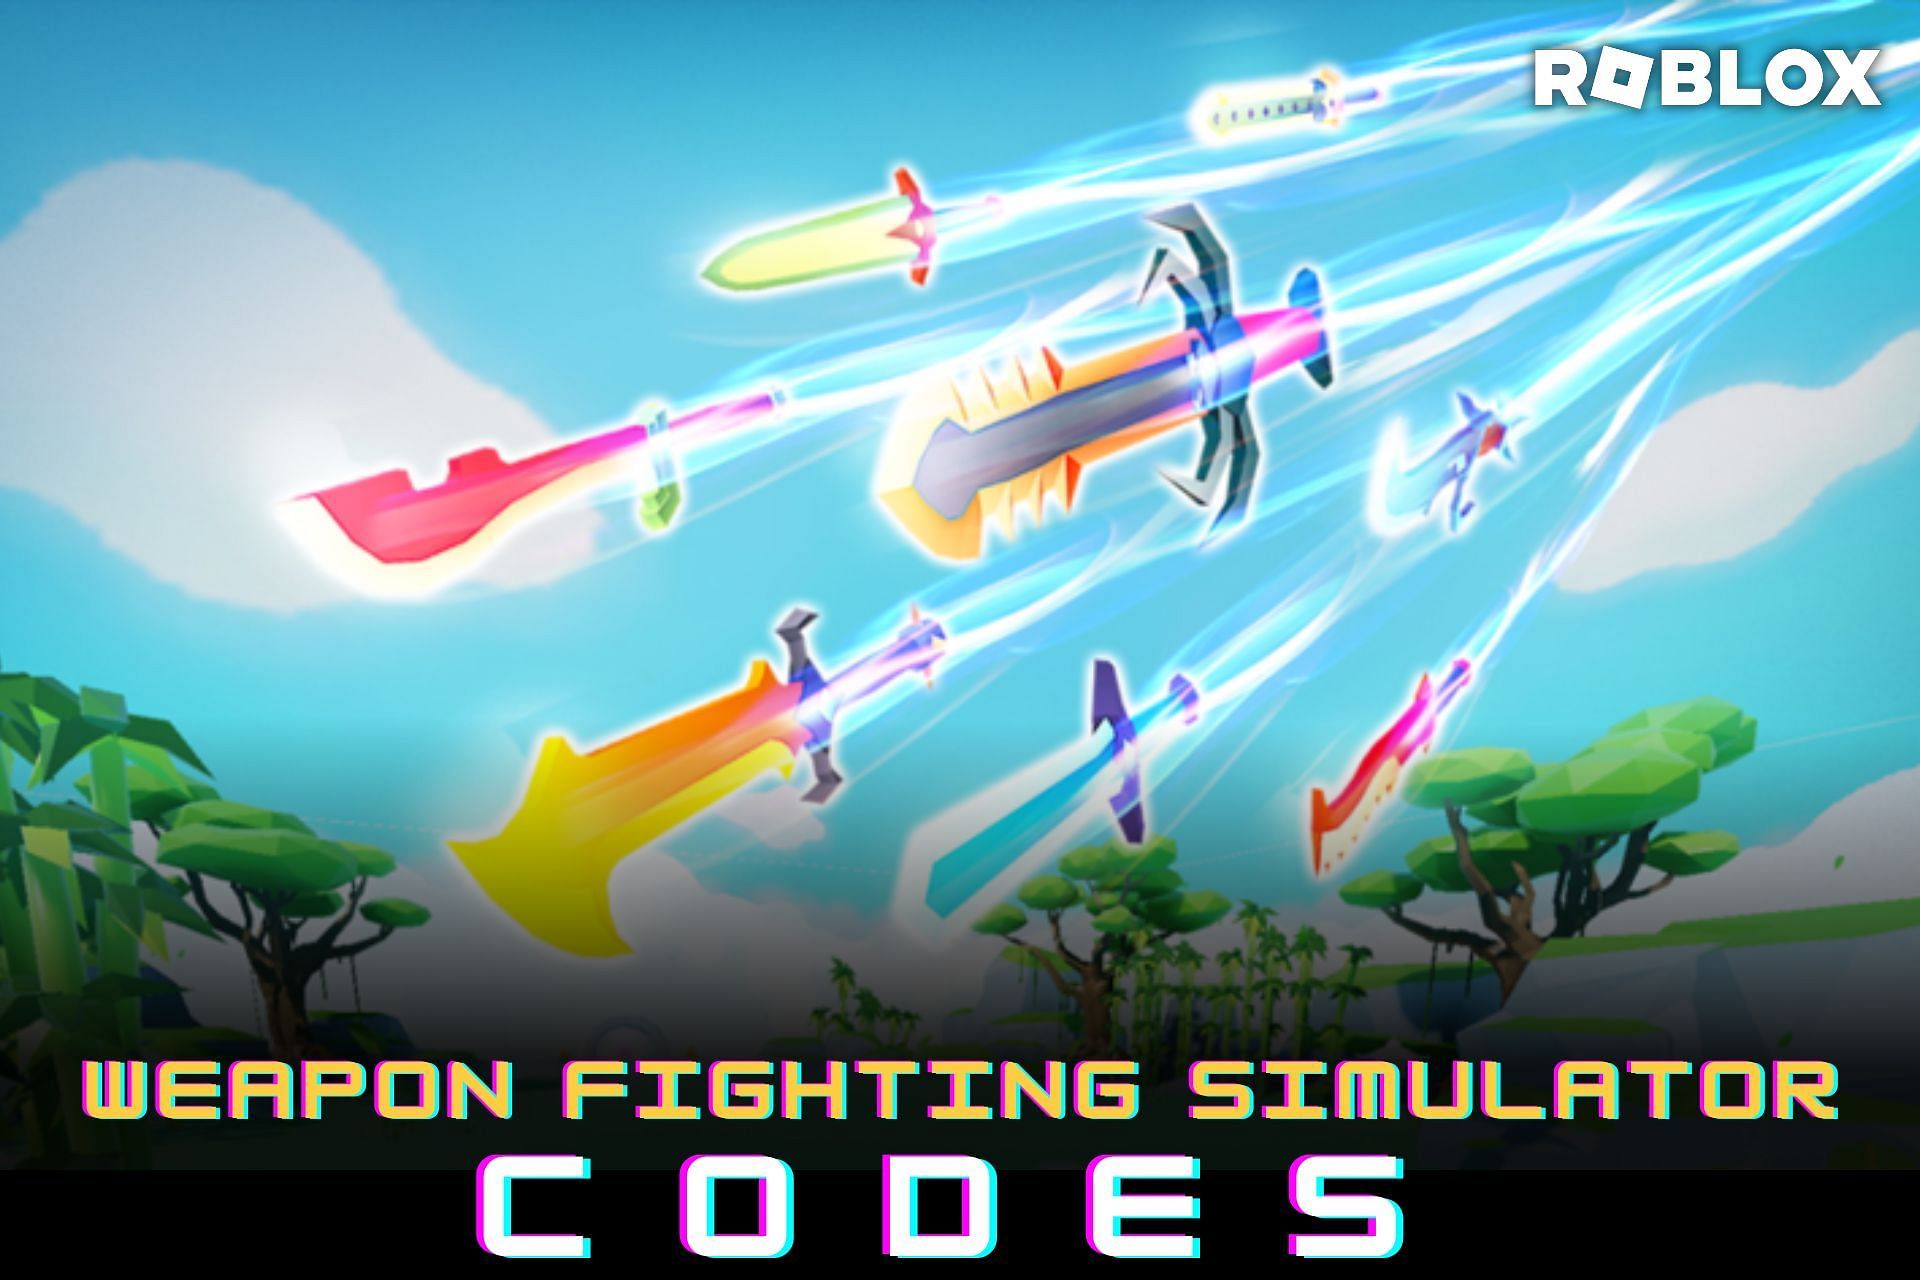 Dragon Fighting Simulator Codes - Free Coins and Boosts